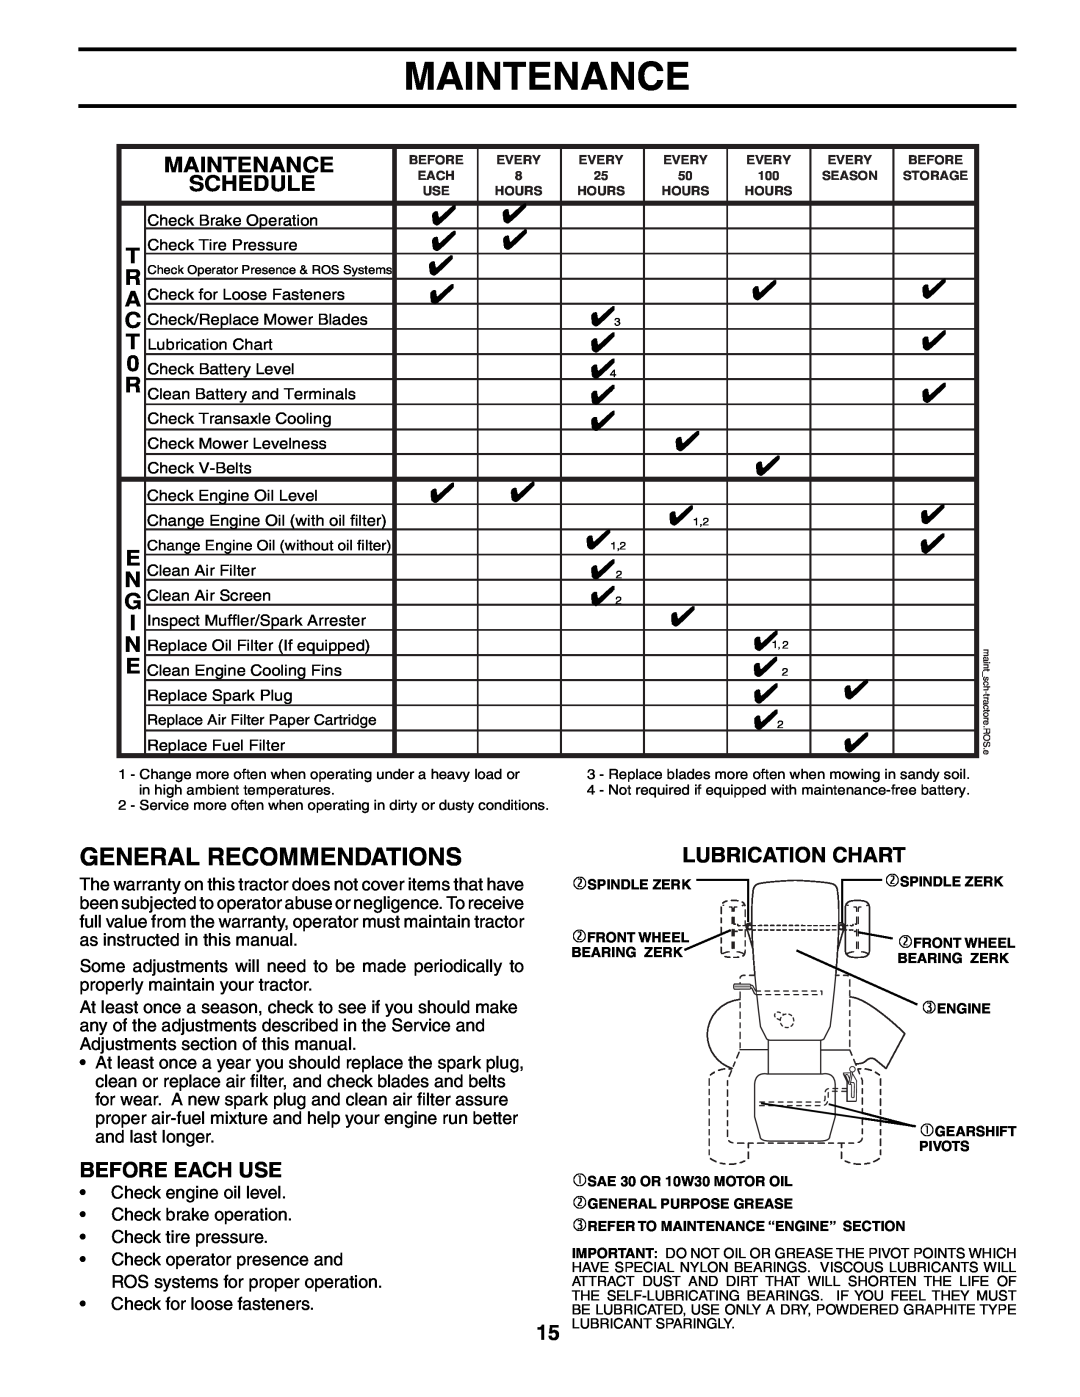 Murray MB12538LT manual Maintenance, General Recommendations, Schedule, Before Each Use, Lubrication Chart 